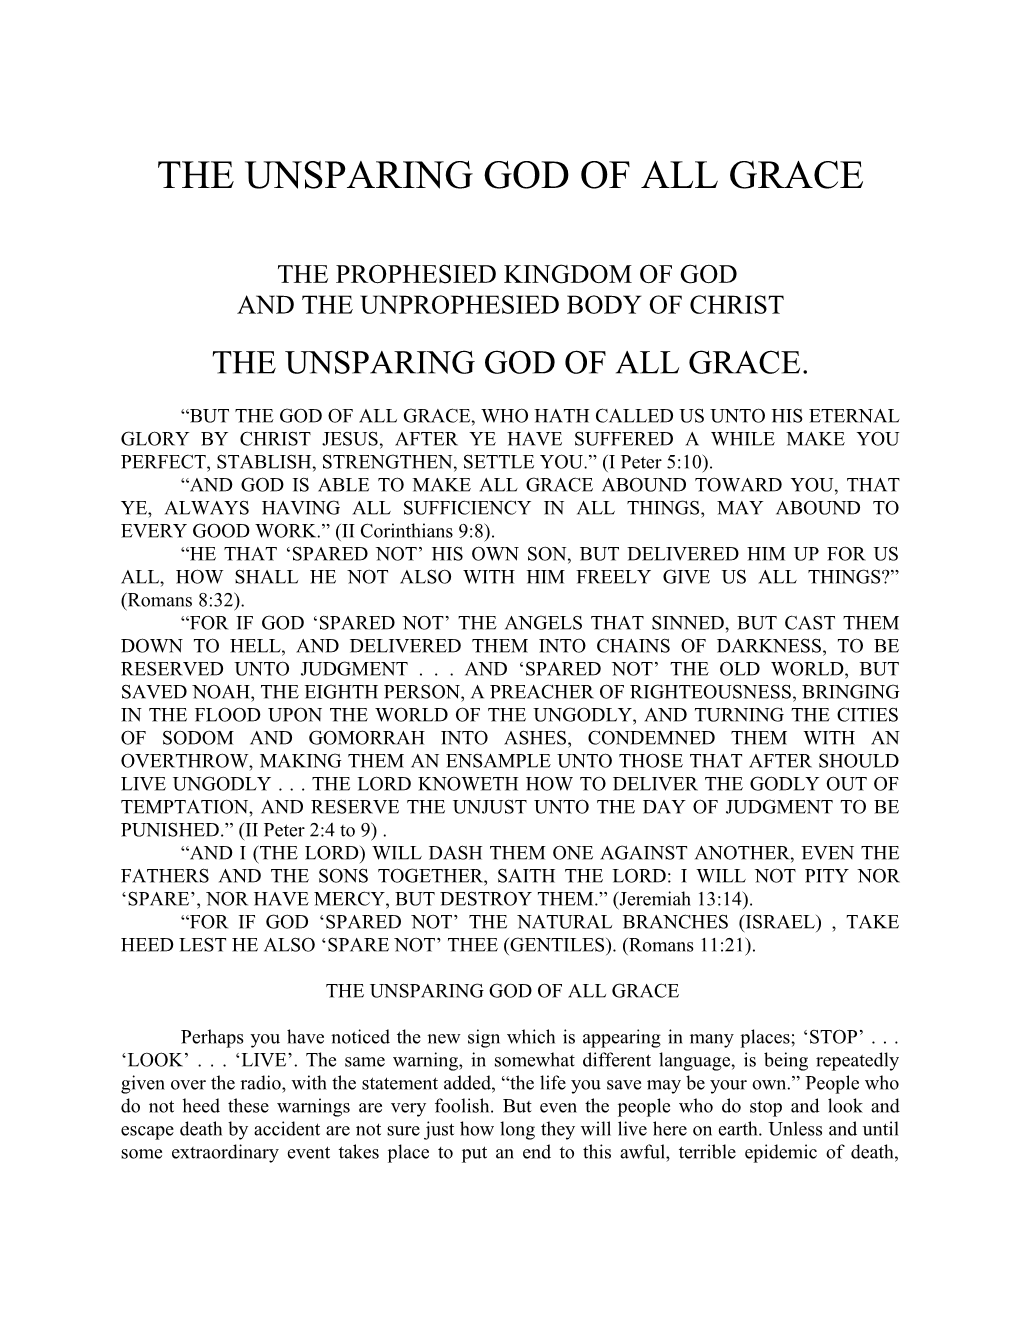 The Unsparing God of All Grace